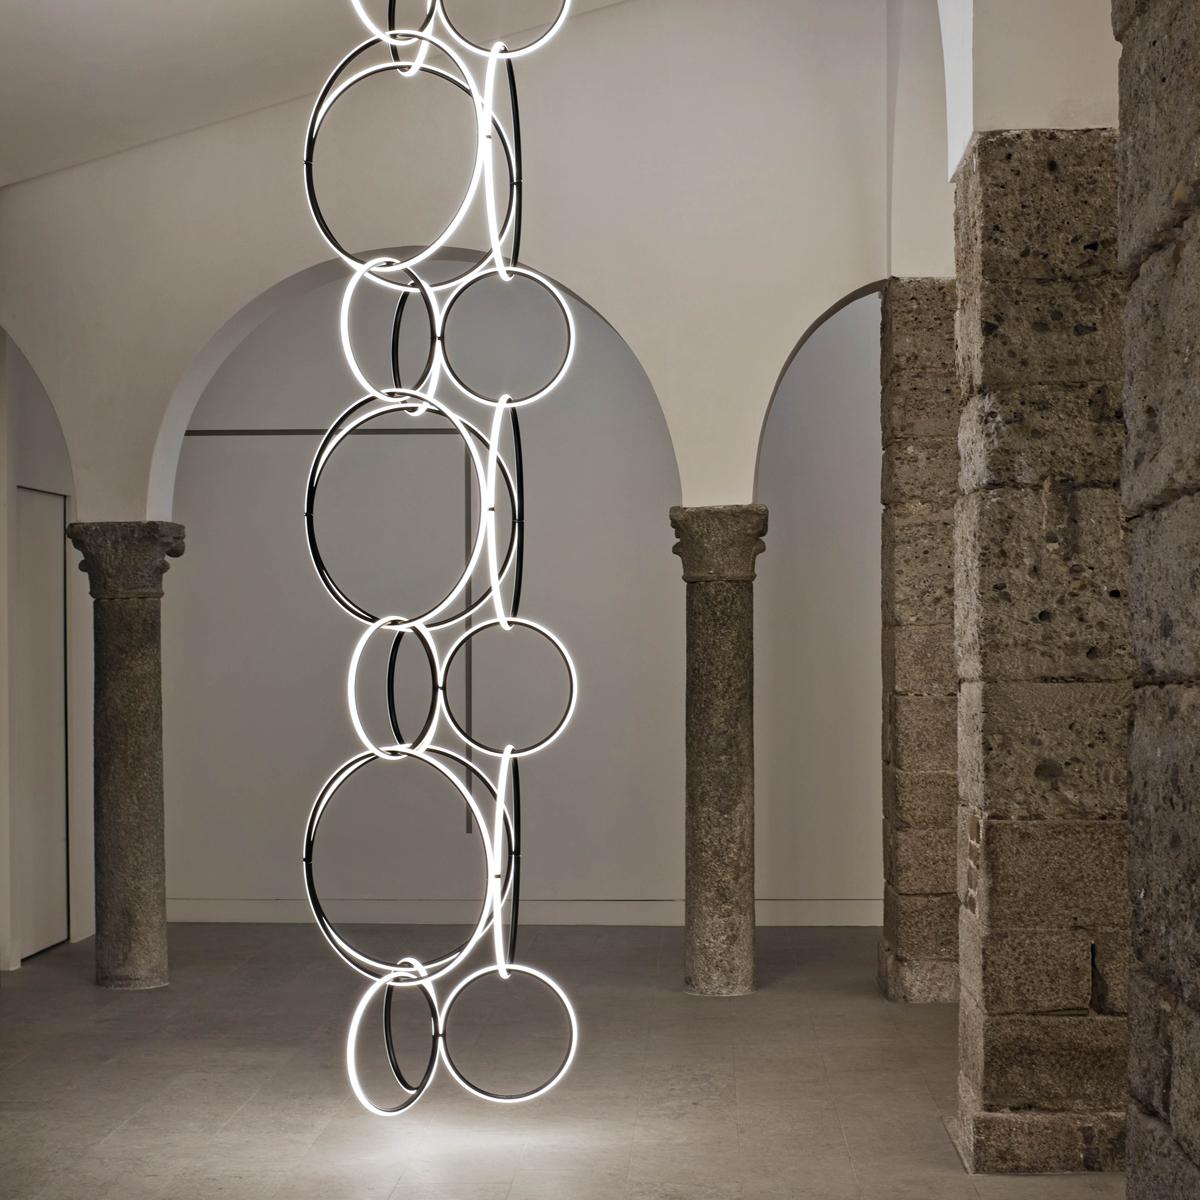 FLOS Large & Small Circles with Line Arrangements Light by Michael Anastassiades For Sale 5